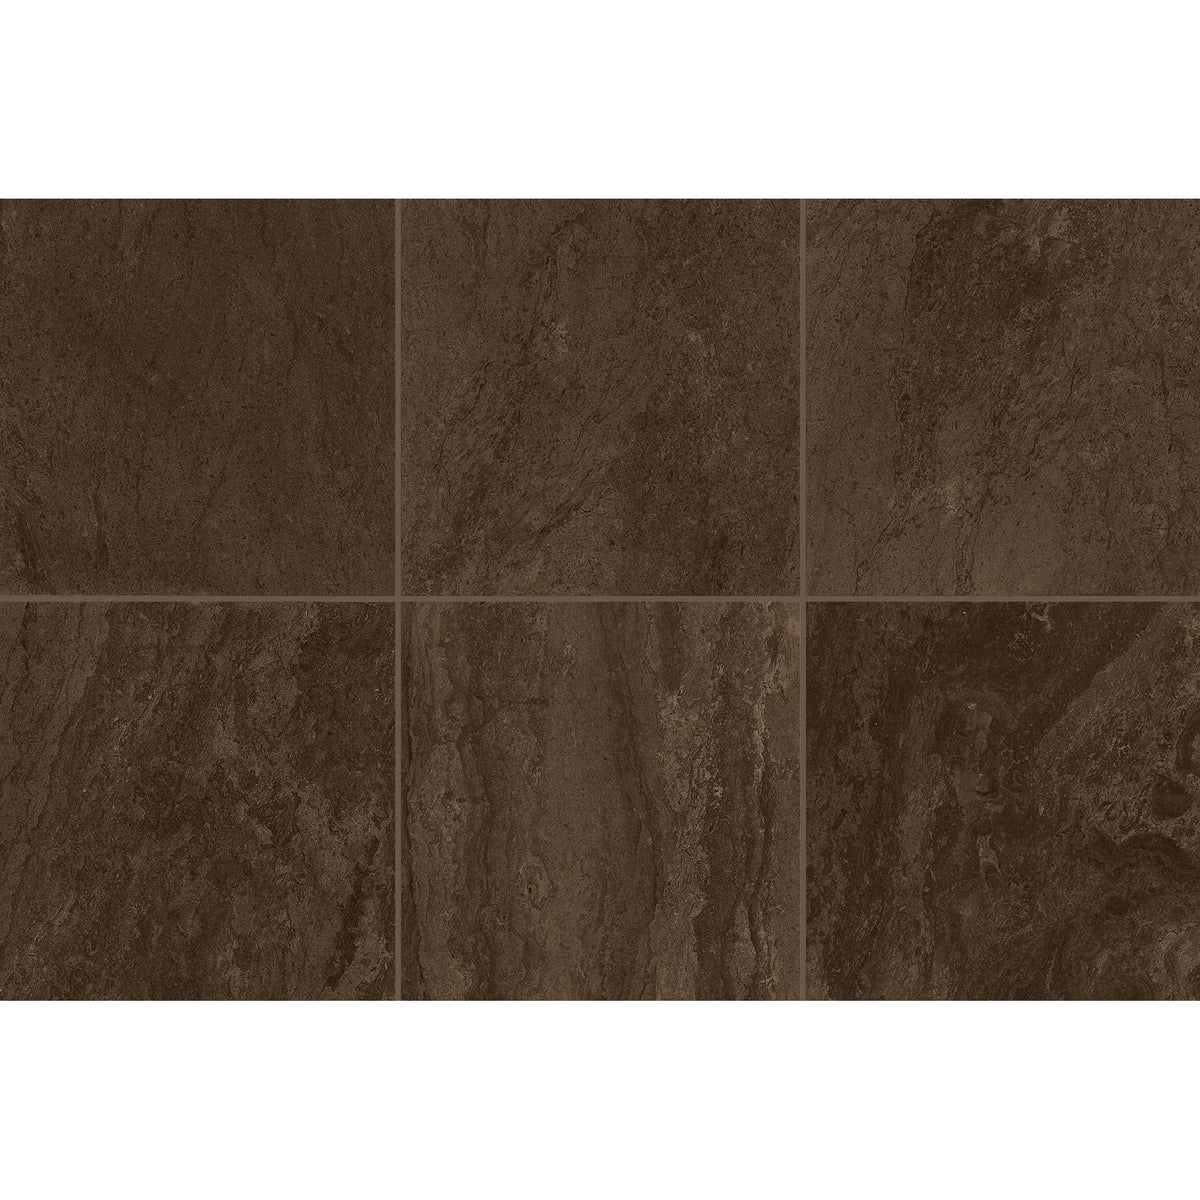 Marazzi - Classentino Marble 24 in. x 24 in. Porcelain Tile - Imperial Brown Polished